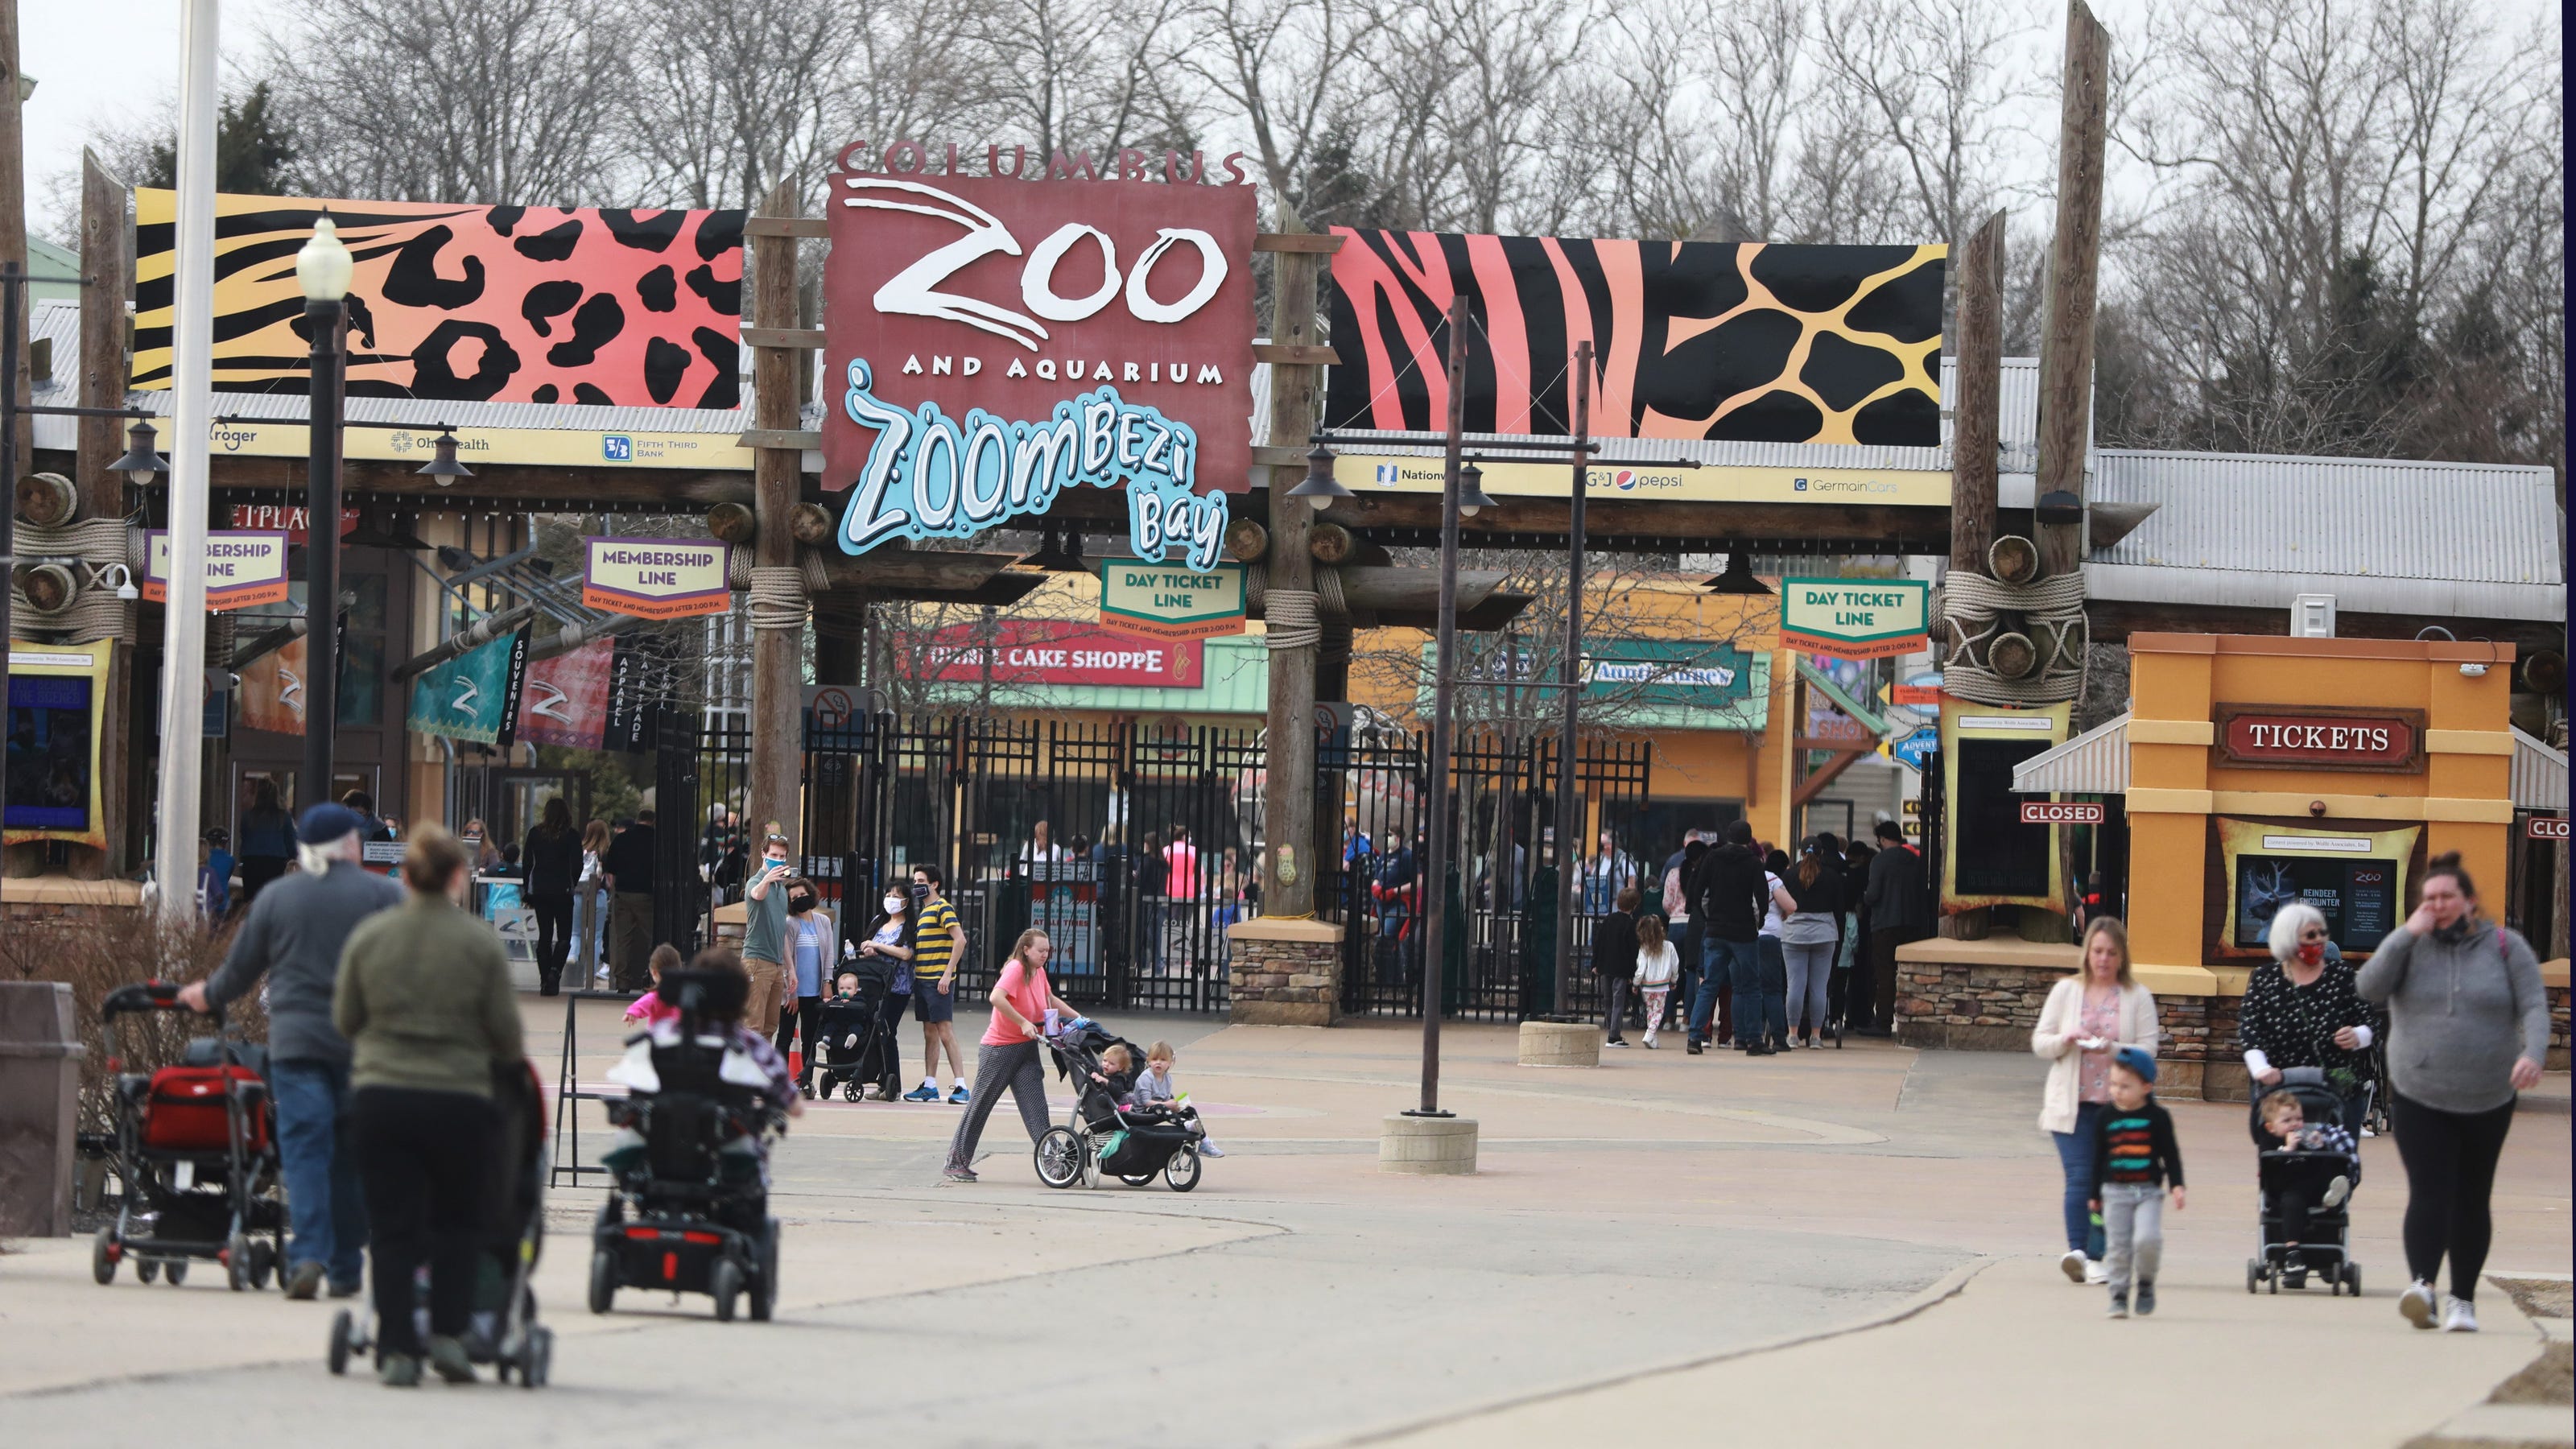 Columbus Zoo's loss of accreditation stands after appeal with AZA